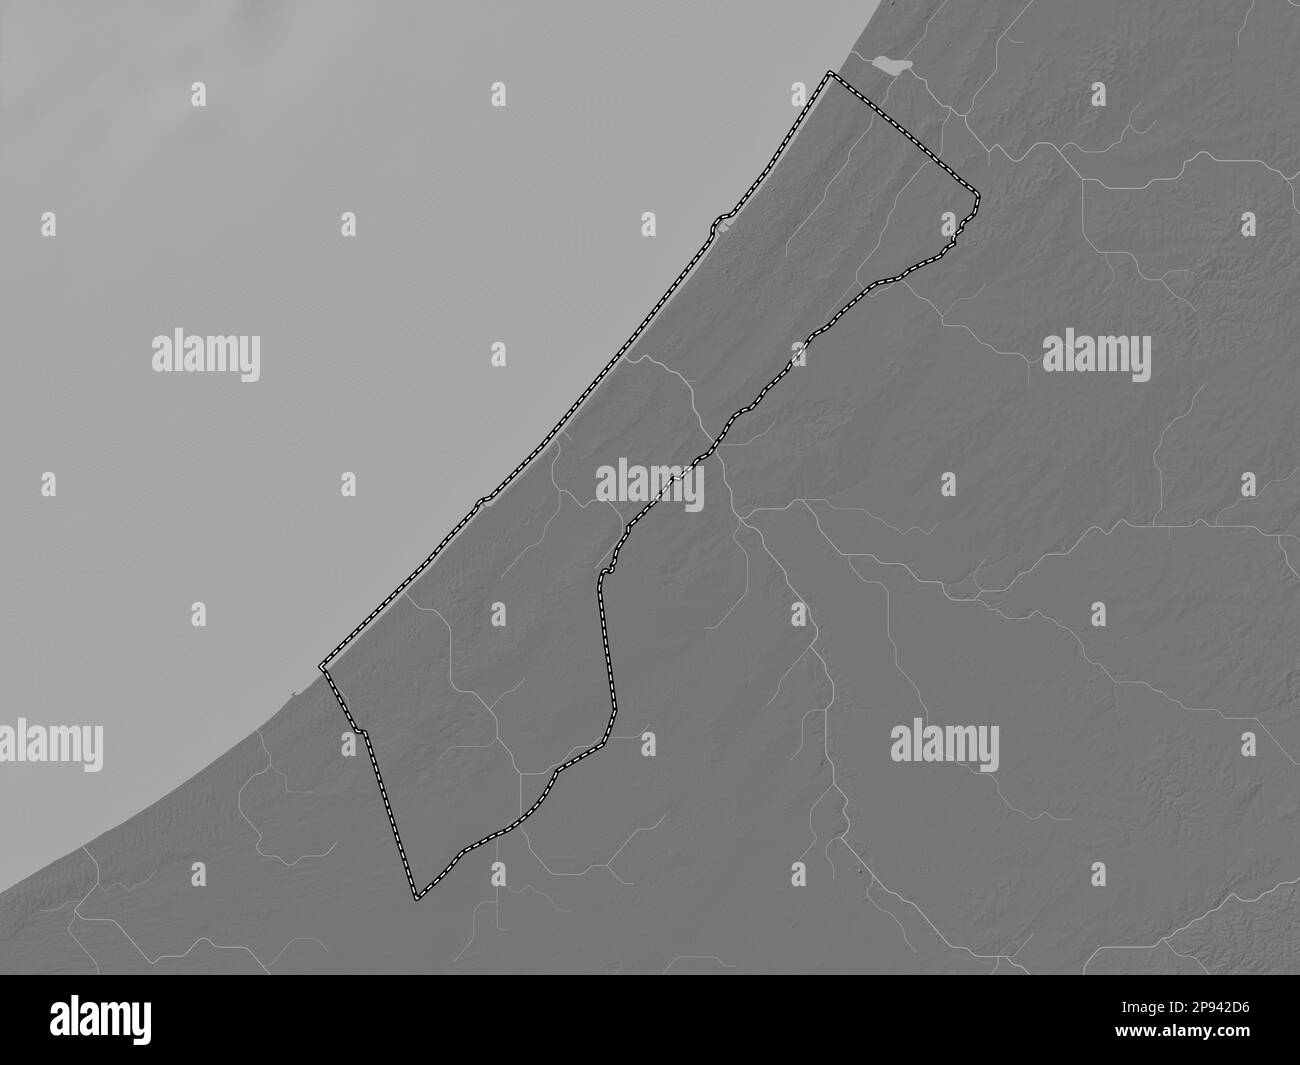 Gaza Strip, region of Palestine. Bilevel elevation map with lakes and rivers Stock Photo